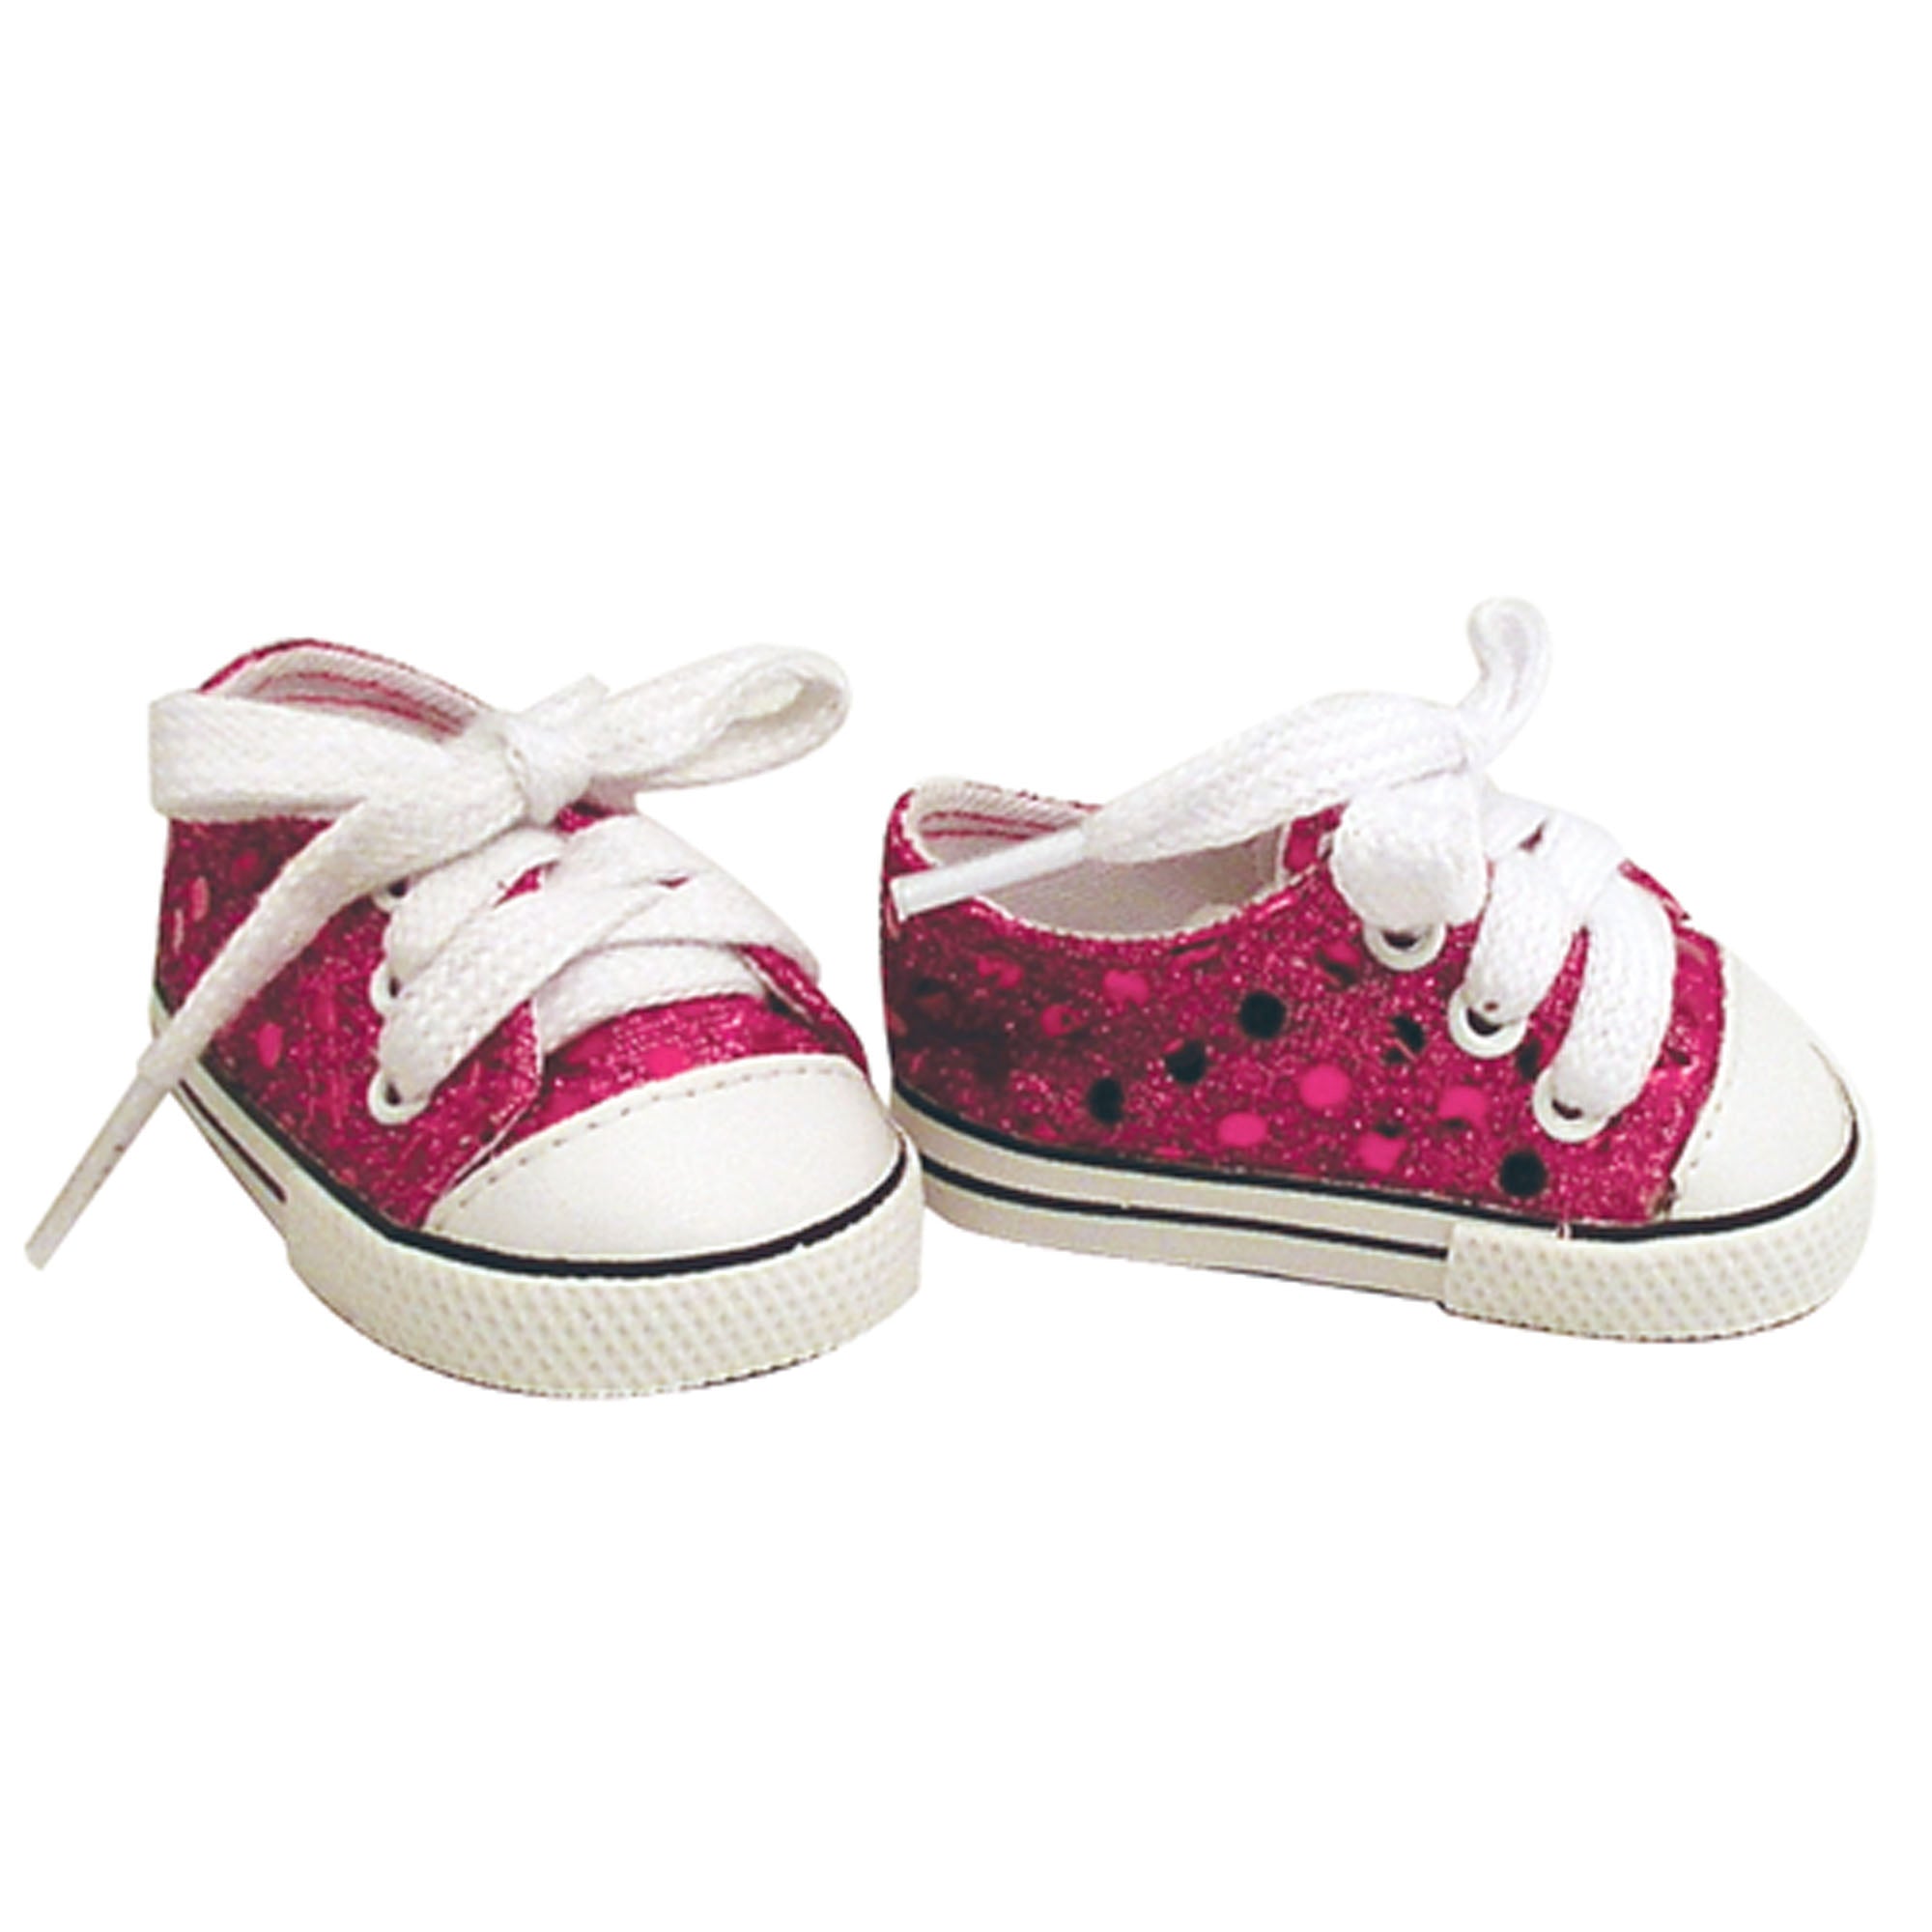 Sophia’s Cute Low-Top Canvas Sneakers with Allover Sparkly Sequins & Classic Exposed Seams for 18” Dolls, Hot Pink